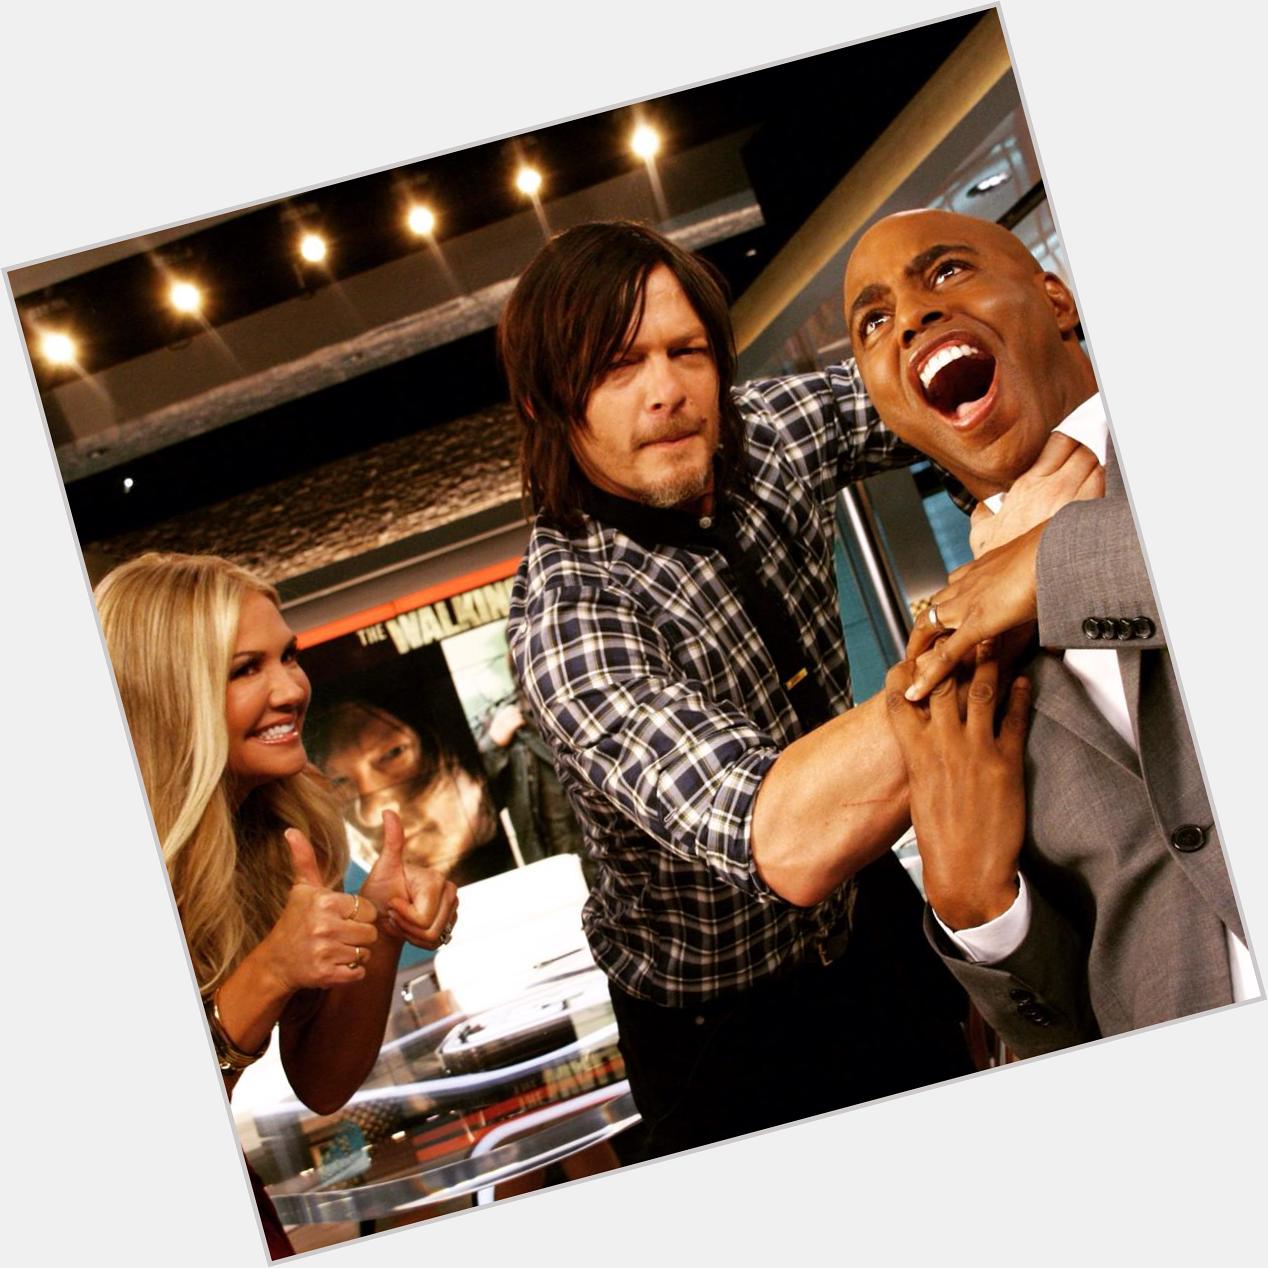 Happy Birthday Norman Reedus! Thanks for showing Kevin some of your moves. 